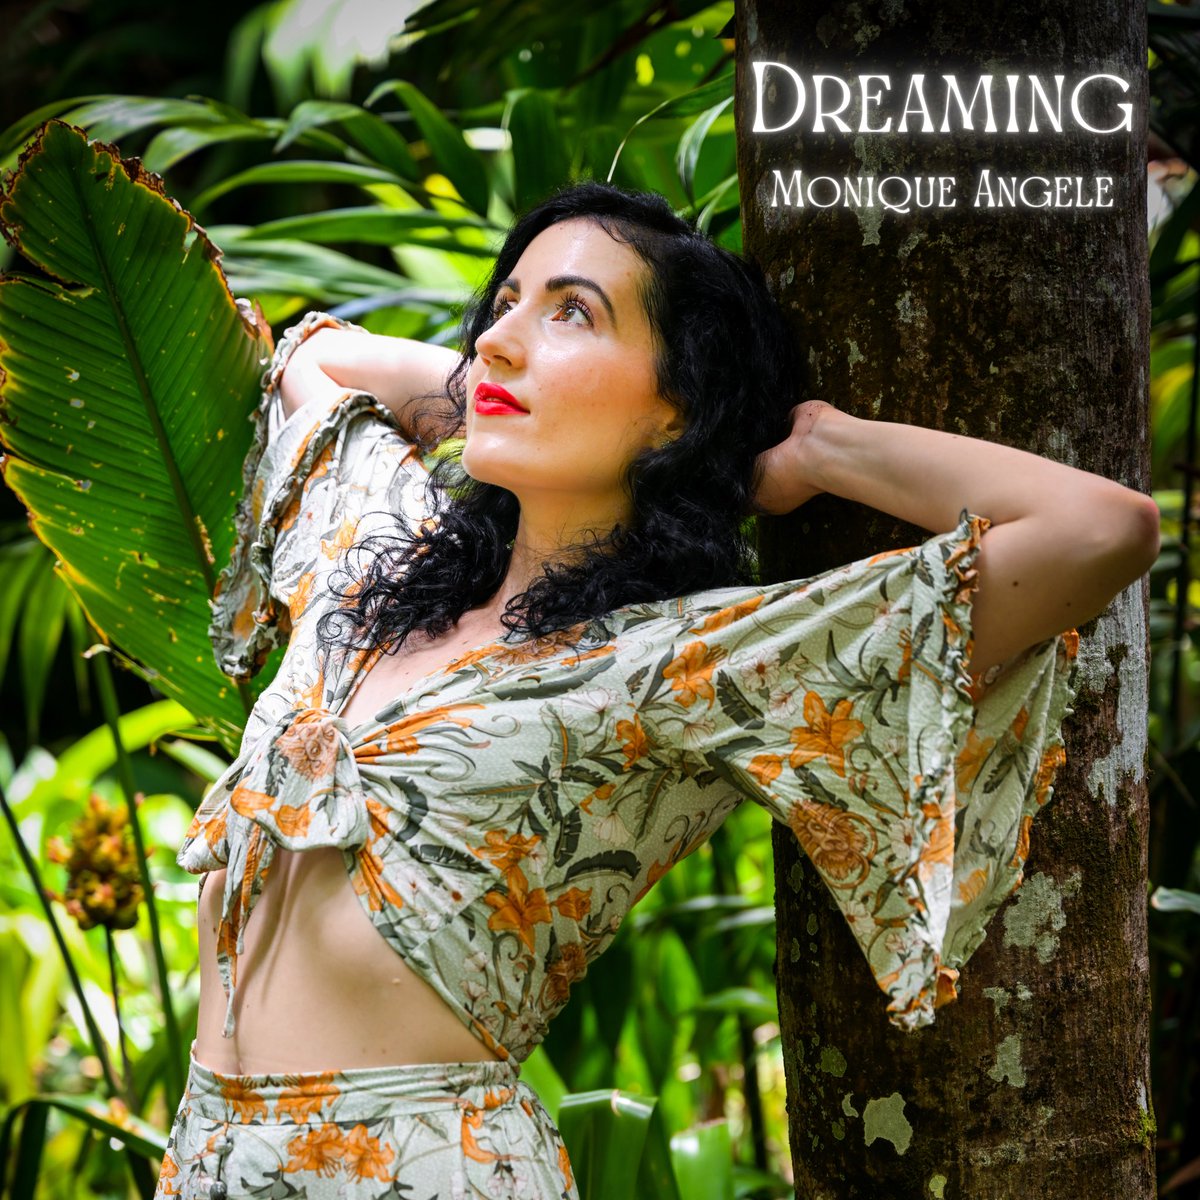 I’m thrilled to announce that my new single “Dreaming” is out now in the world!! 🎶💕🌿 Listen to the song & watch my official music video here moniqueangele.hearnow.com 
Thanks so much! 🤗❤️
#dreaming #newmusicfridays #newmusic #newsong #newsingle #moniqueangele #singersongwriter